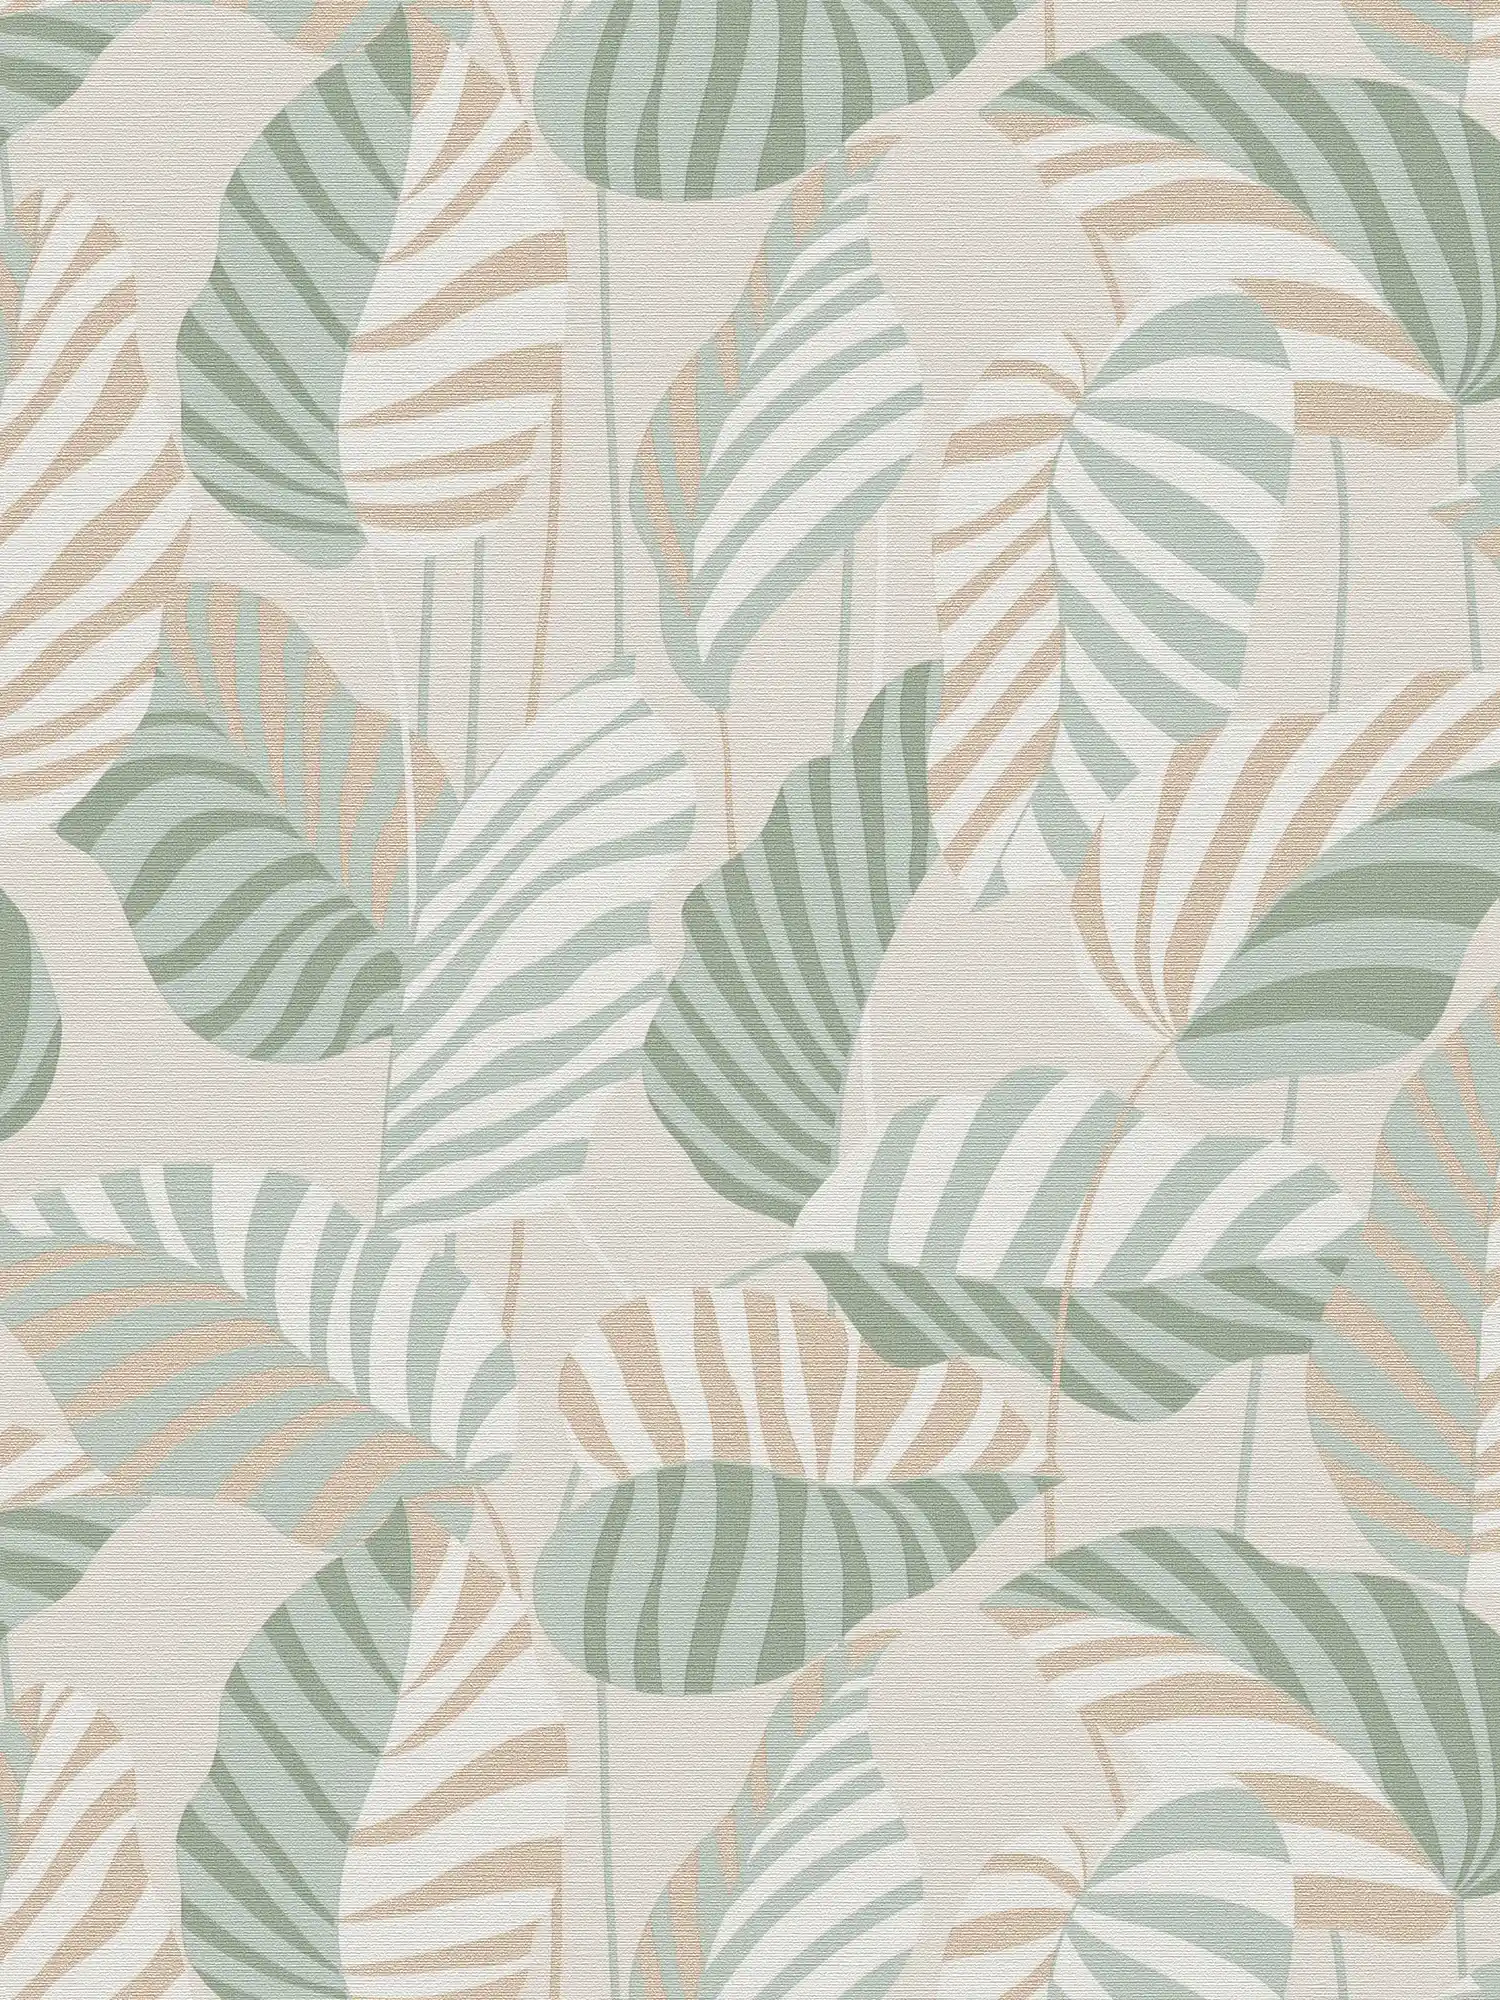 Non-woven wallpaper in natural style with slightly shiny palm leaves - cream, green, gold
